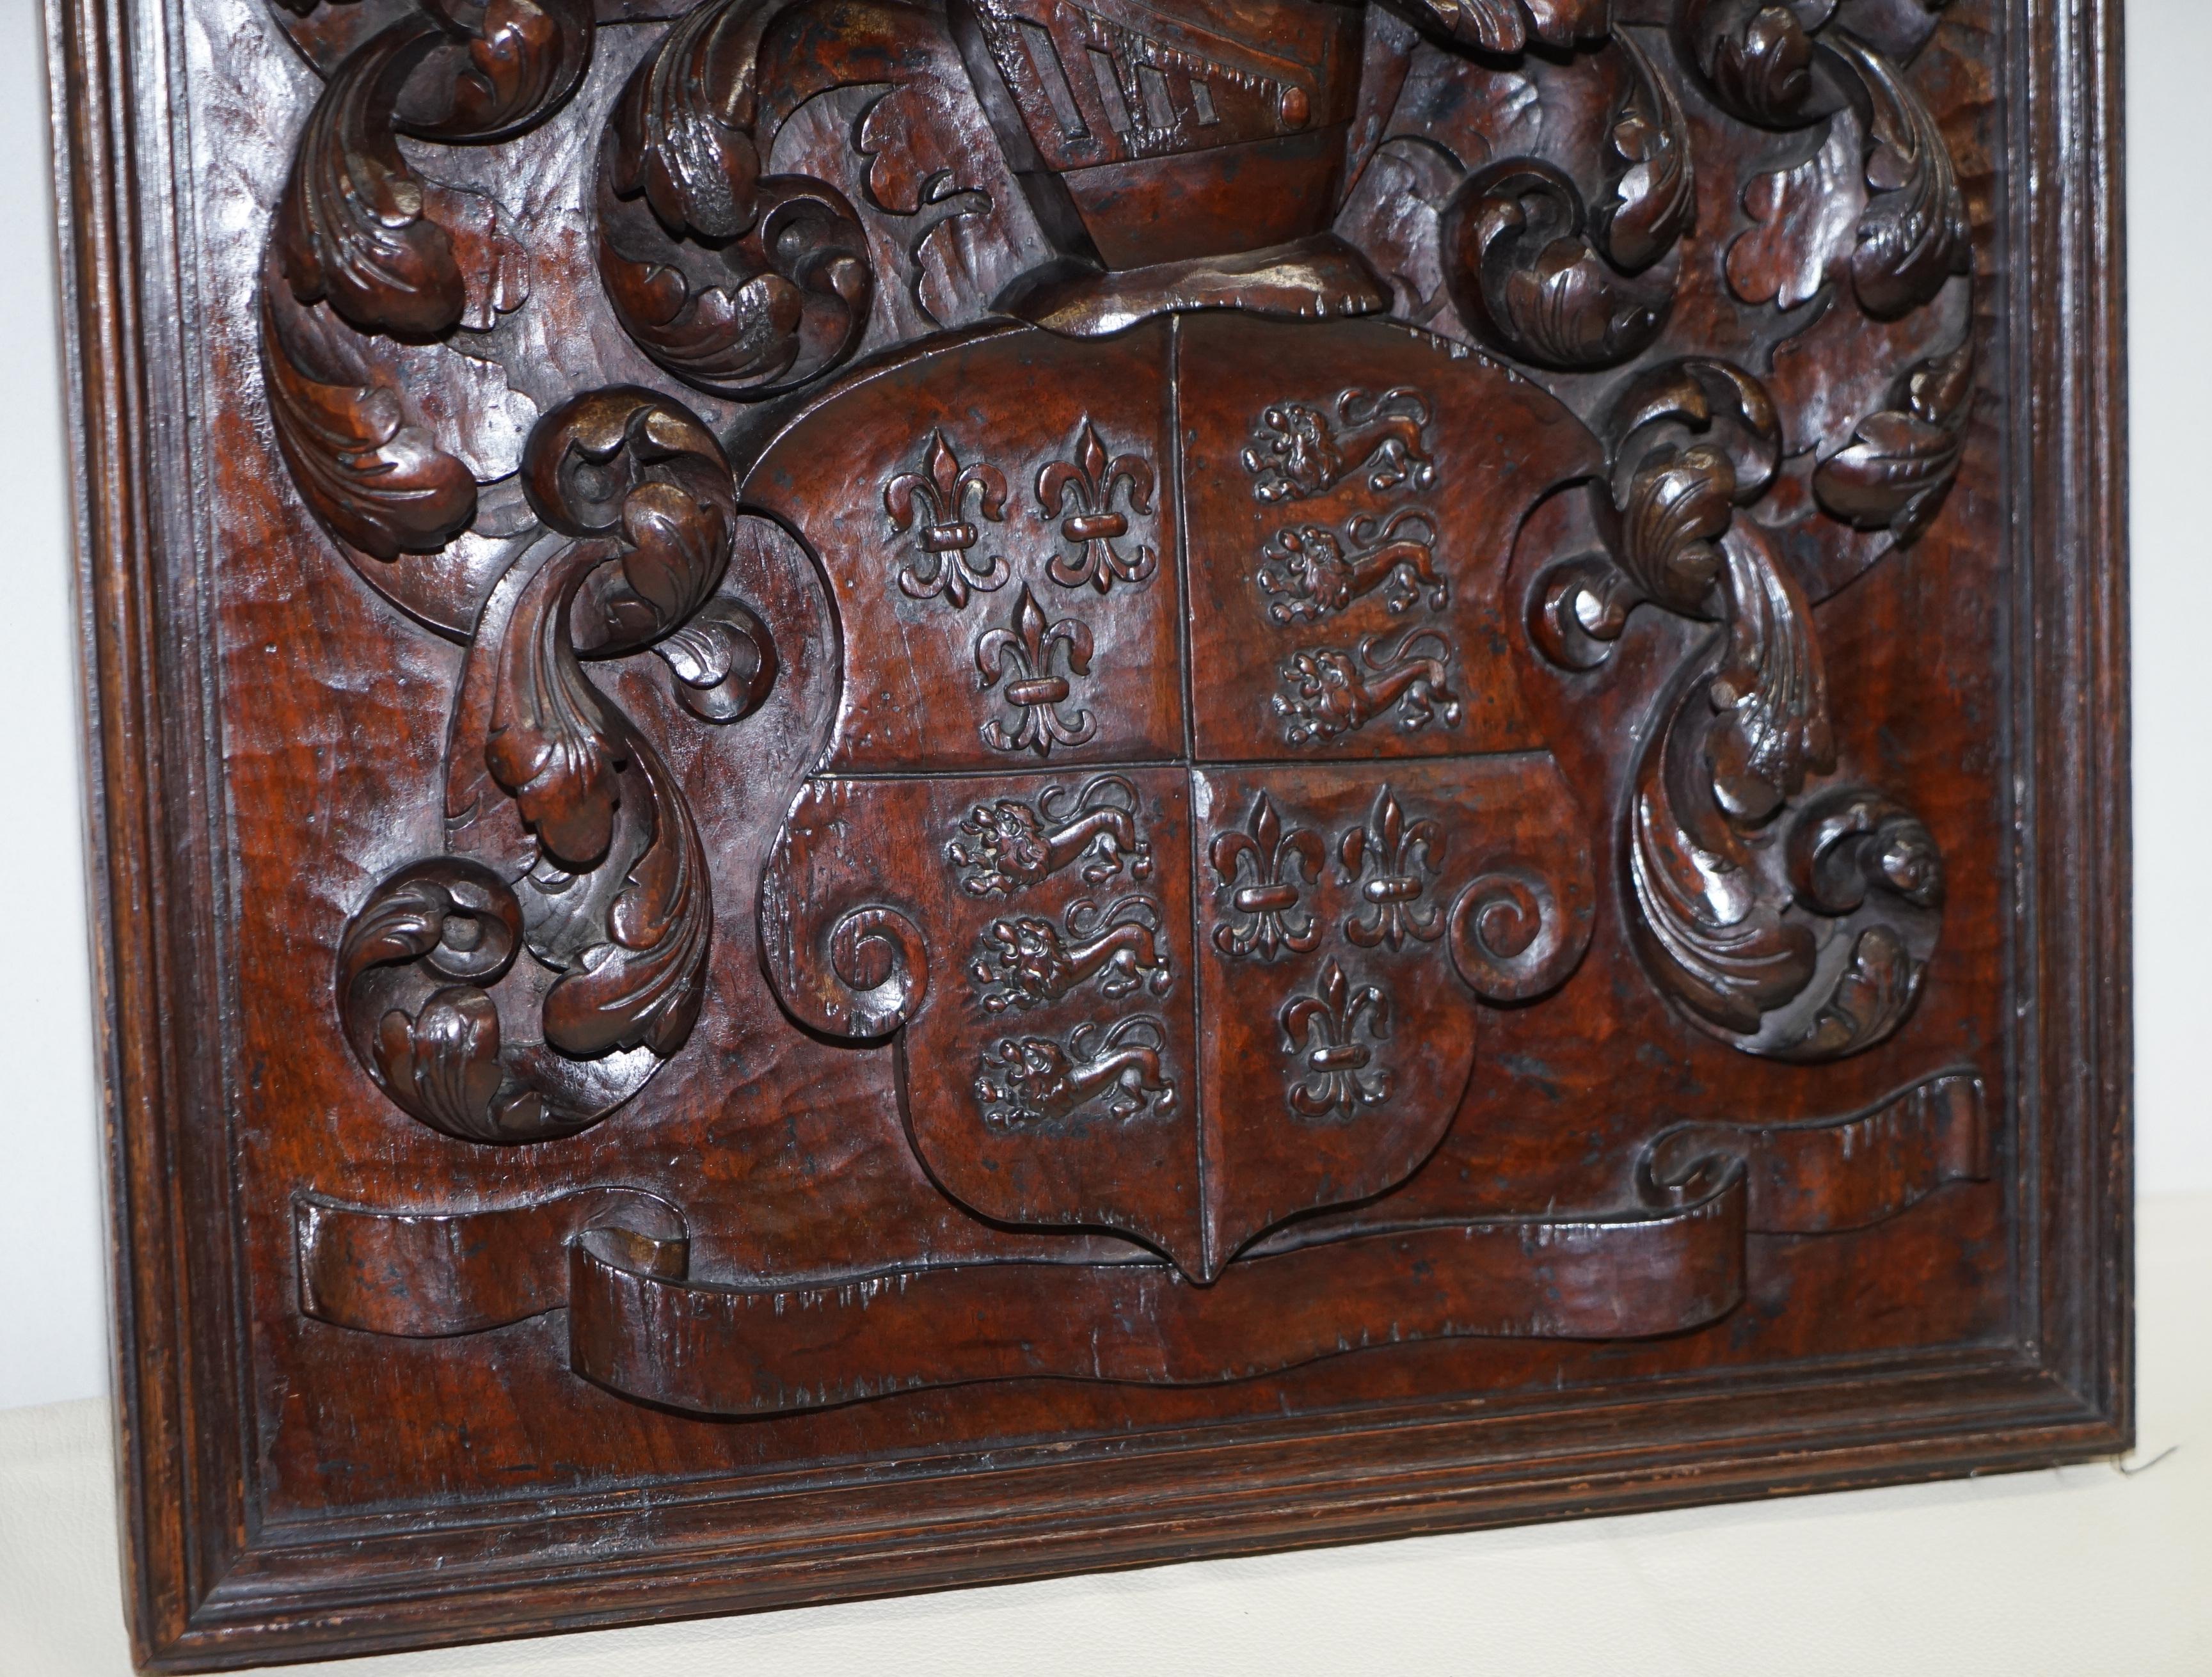 RARE ANTiQUE 1405-1603 ENGLISH ROYAL COAT OF ARMS ARMORIAL CREST CARVED WALNUT For Sale 2